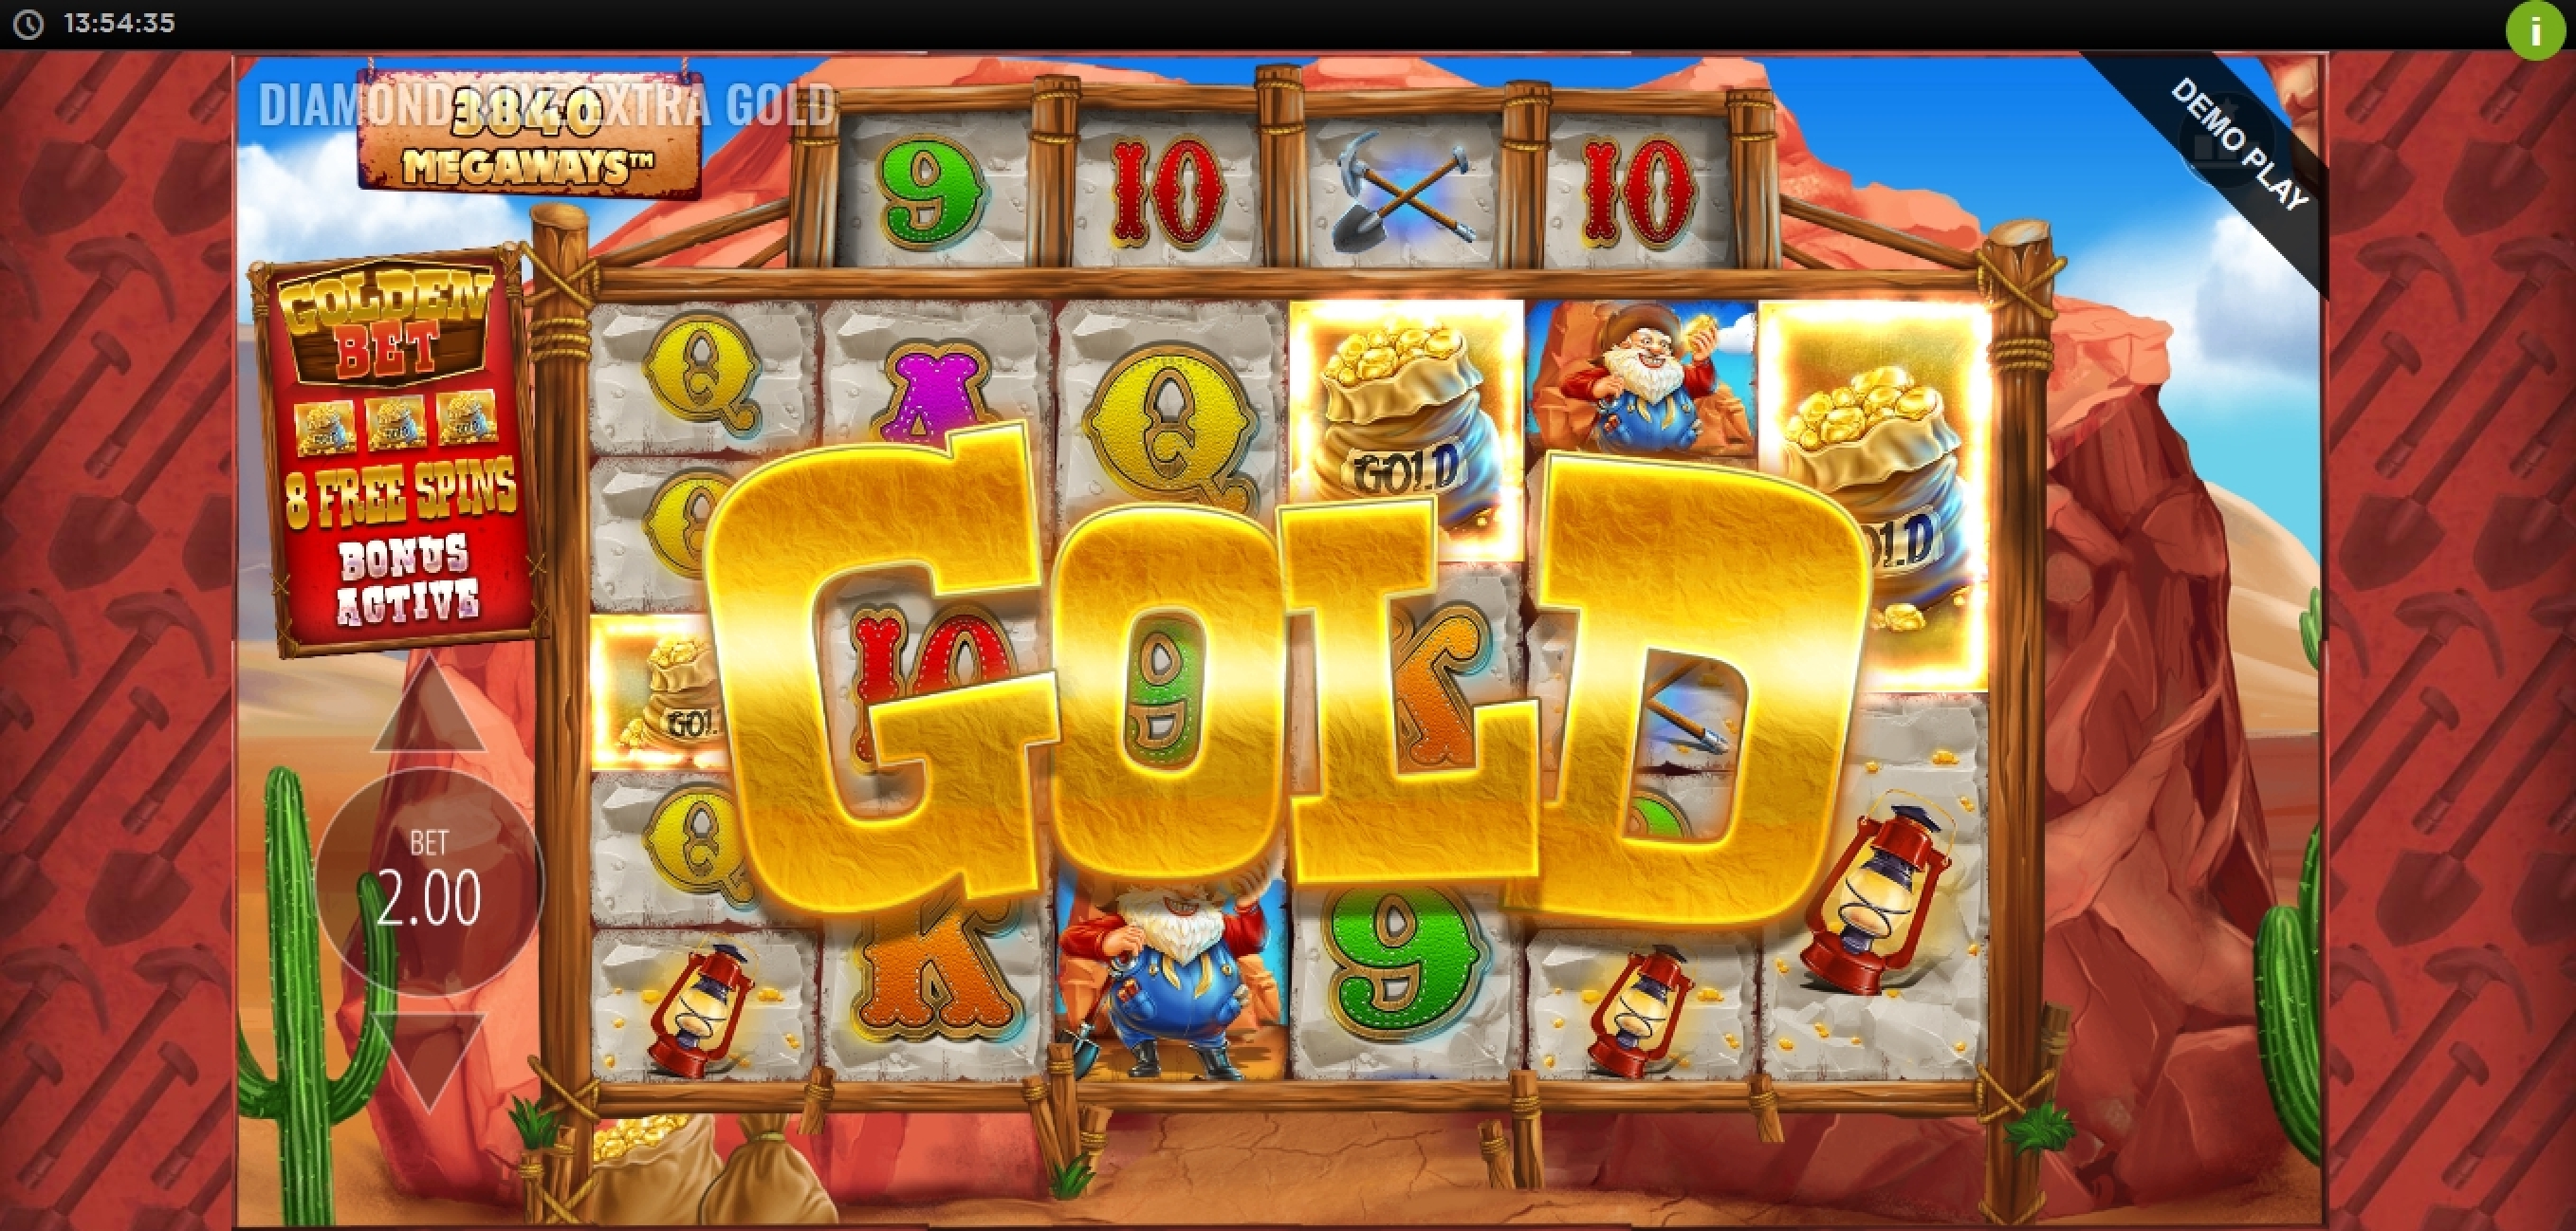 Win Money in Diamond Mine Extra Gold Megaways Free Slot Game by Blueprint Gaming